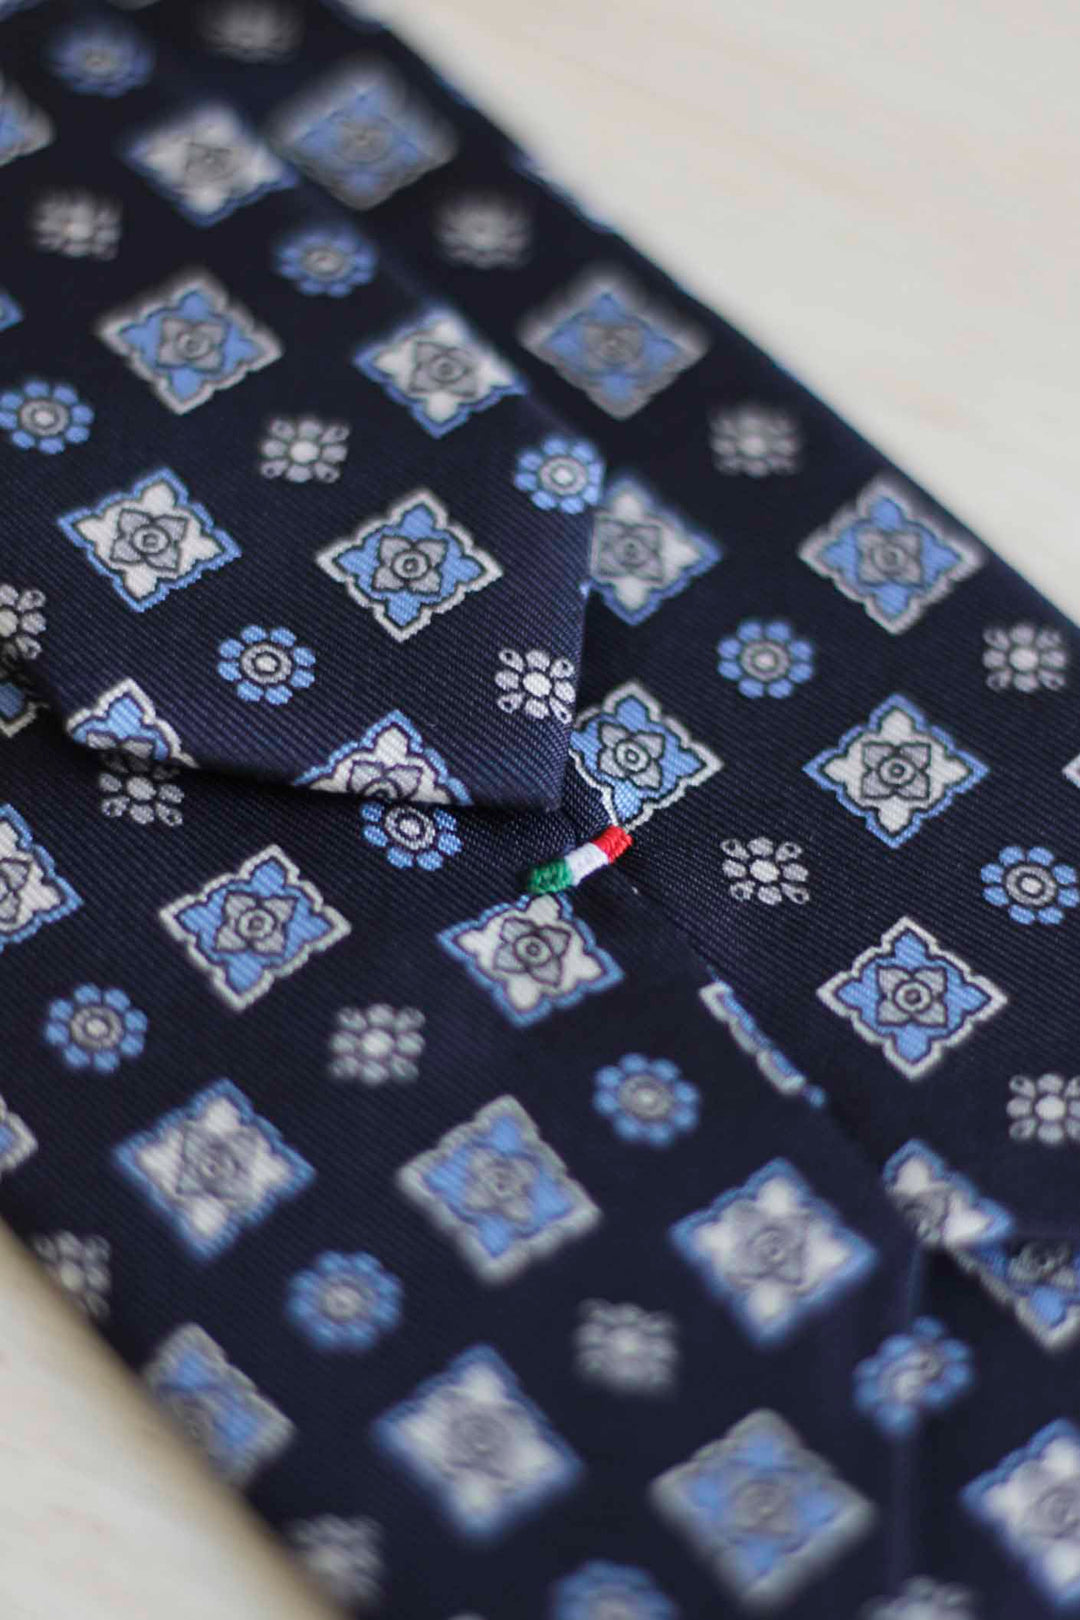 Navy Blue Silk Napoli Tie Starry Geometry Mixed Light Blue and White